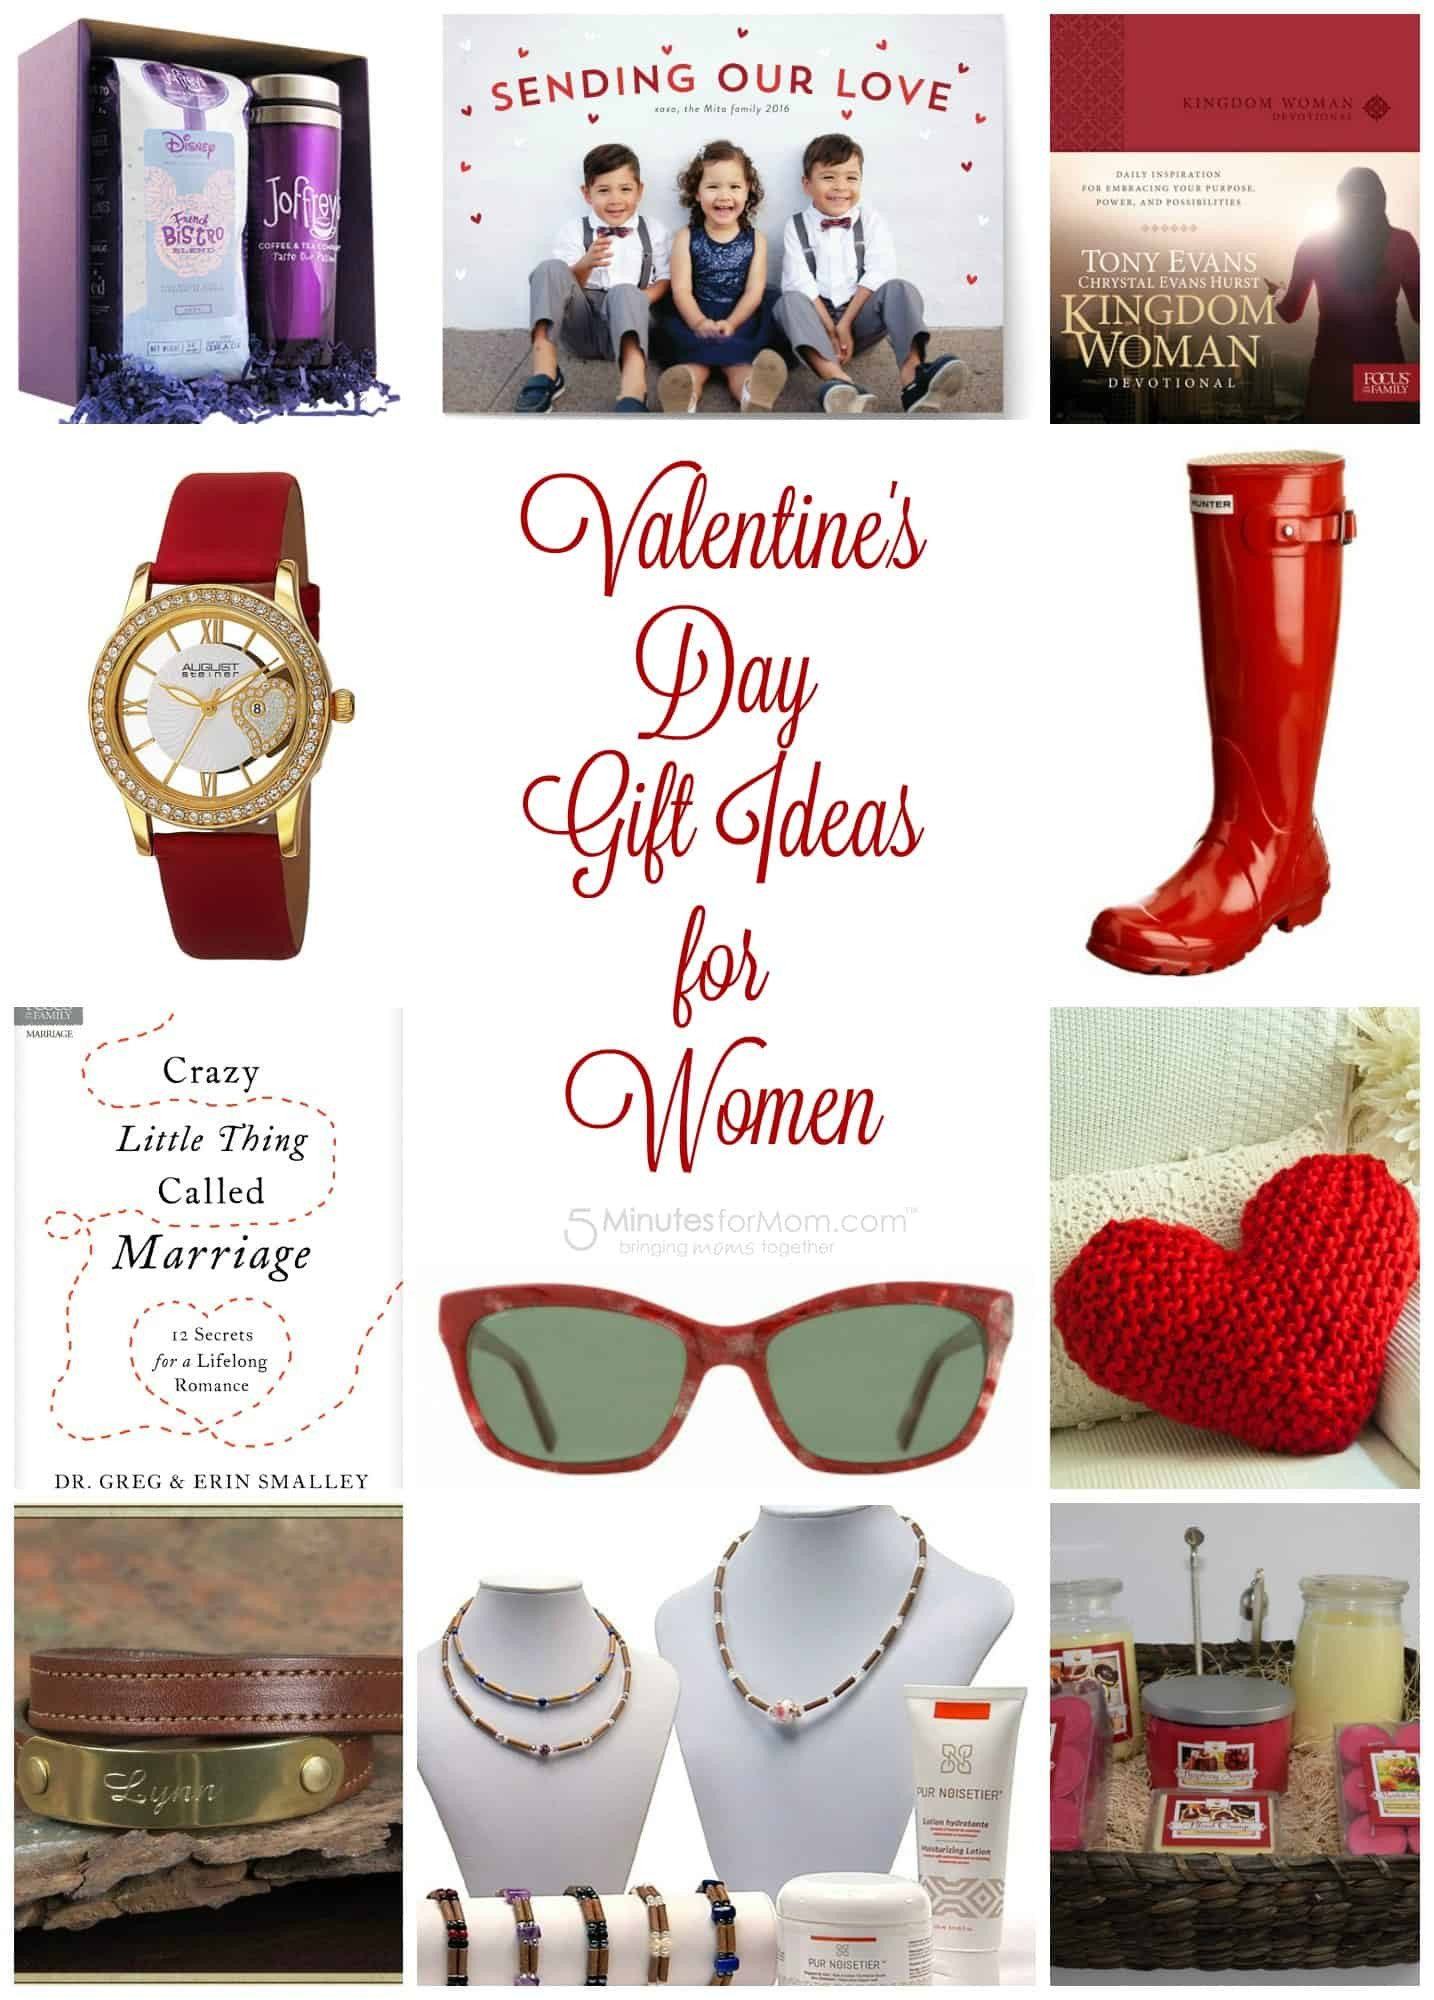 Good Valentines Day Gift Ideas For Girls
 Valentine s Day Gift Guide for Women Plus $100 Amazon